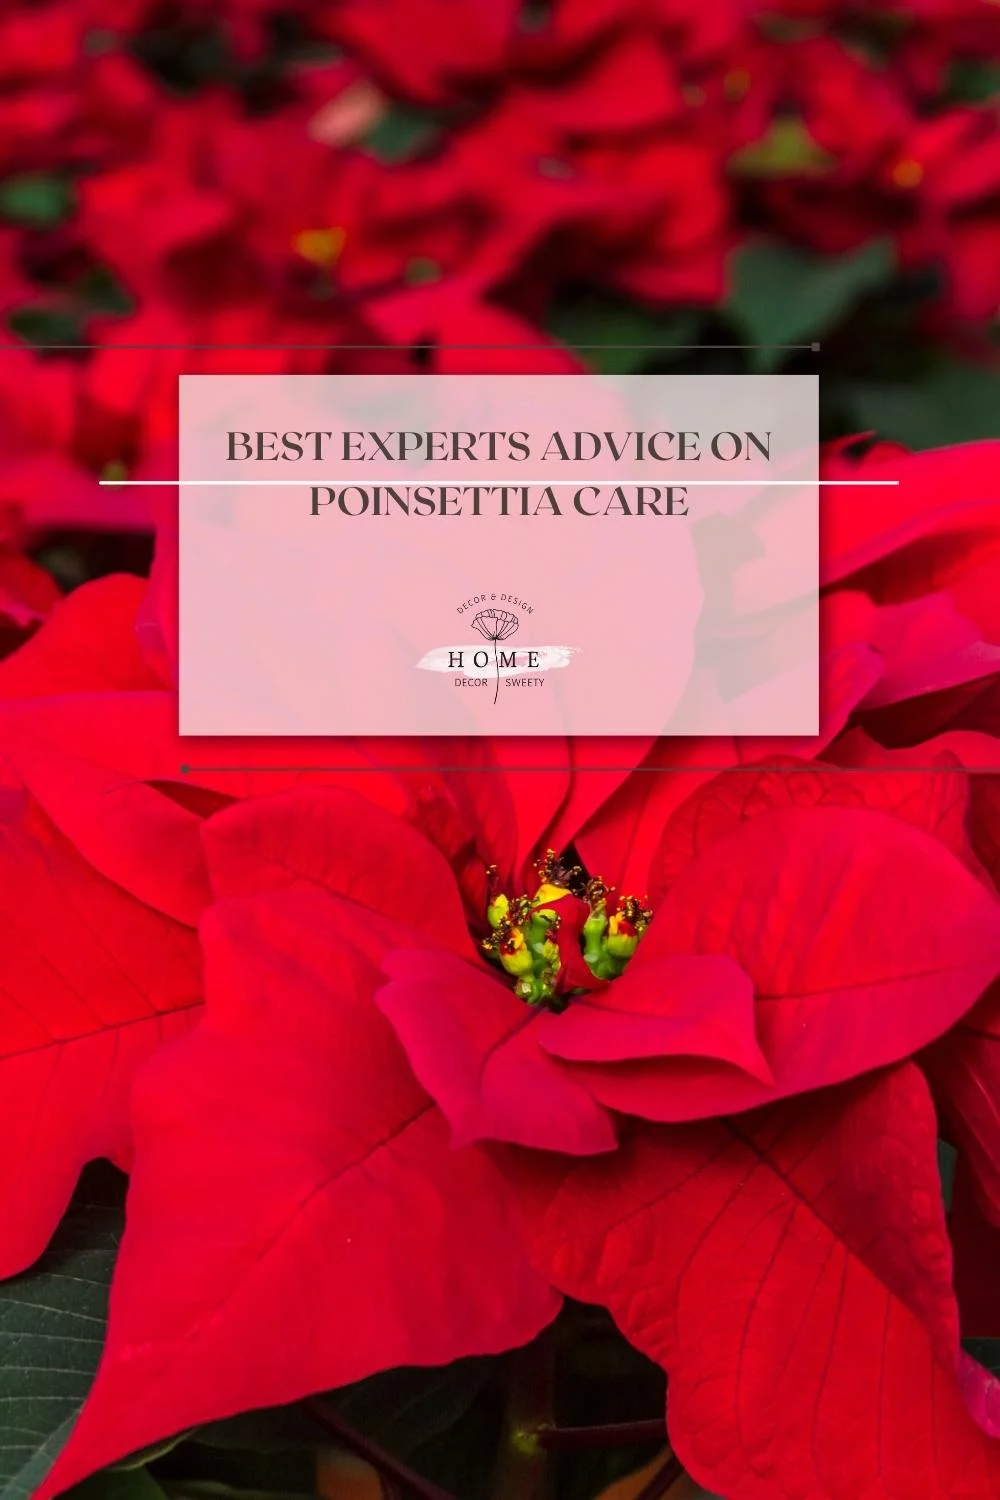 Best Experts advice on Poinsettia care